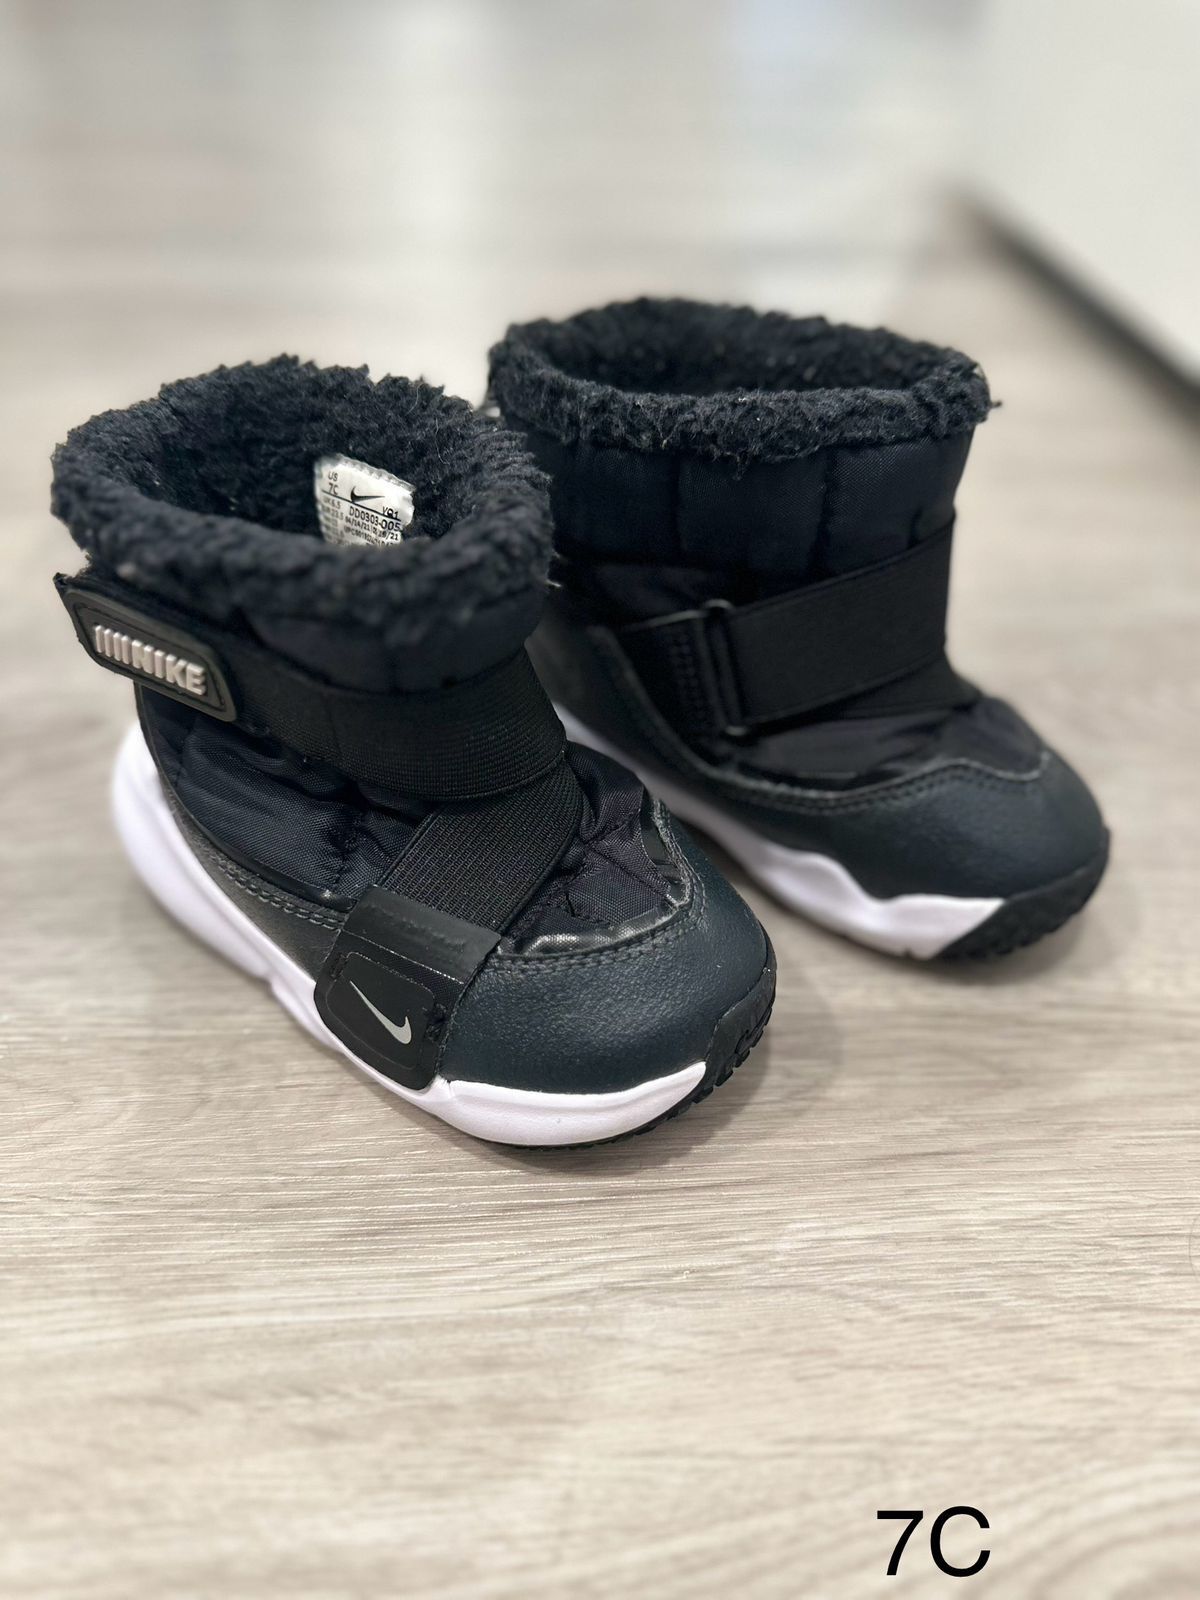 Nike Snow Boots 7c 